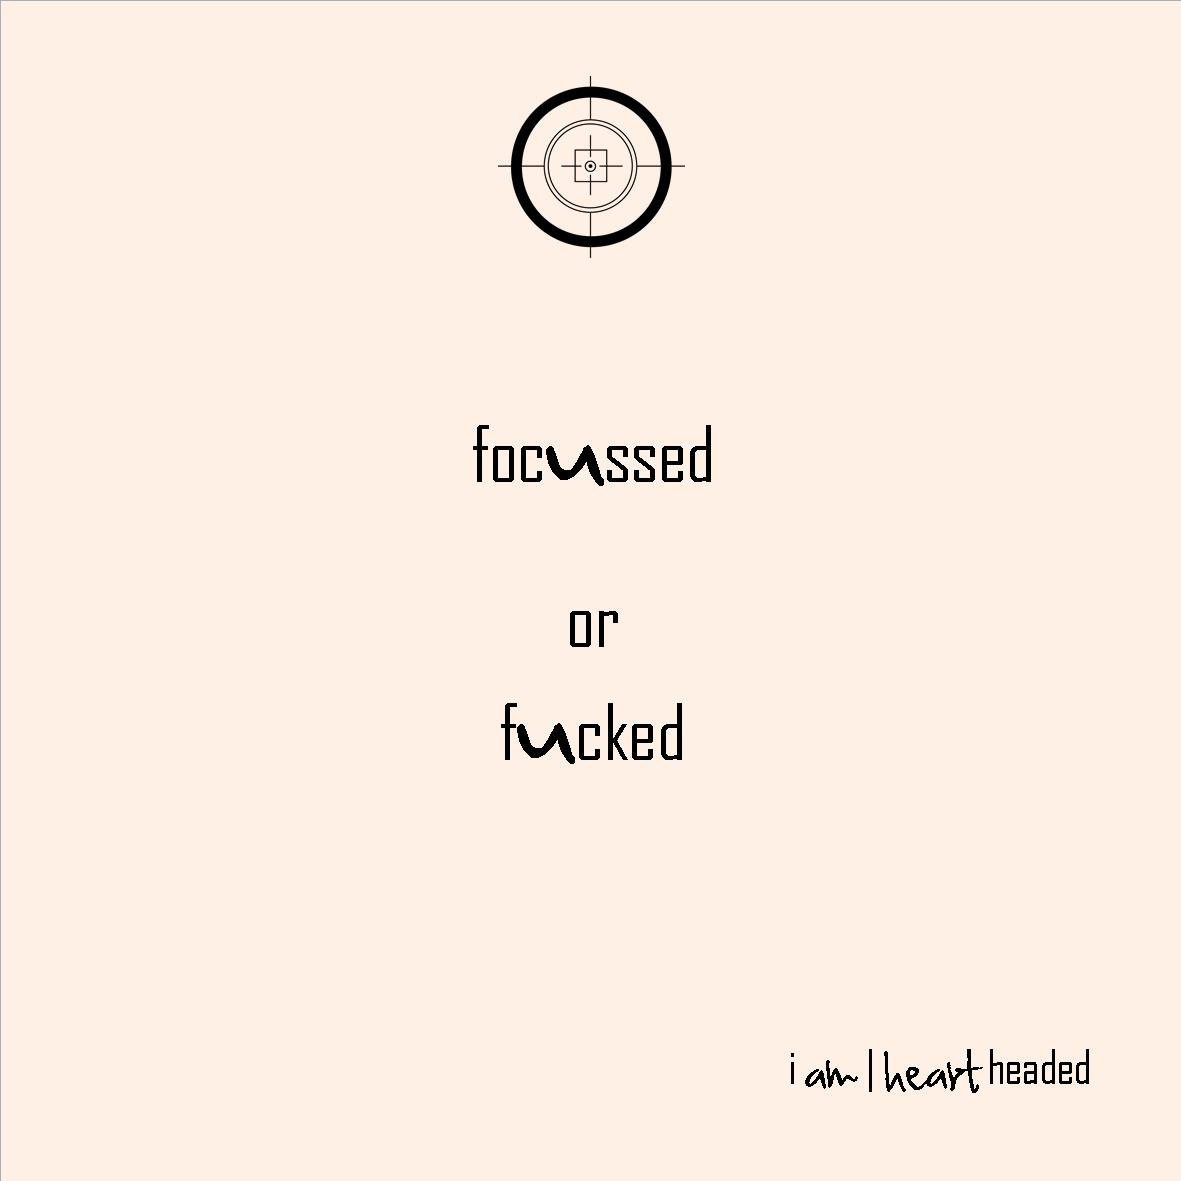 full-size featured image of quote 'focussed or fucked' in category 'witty' at i am | heart headed